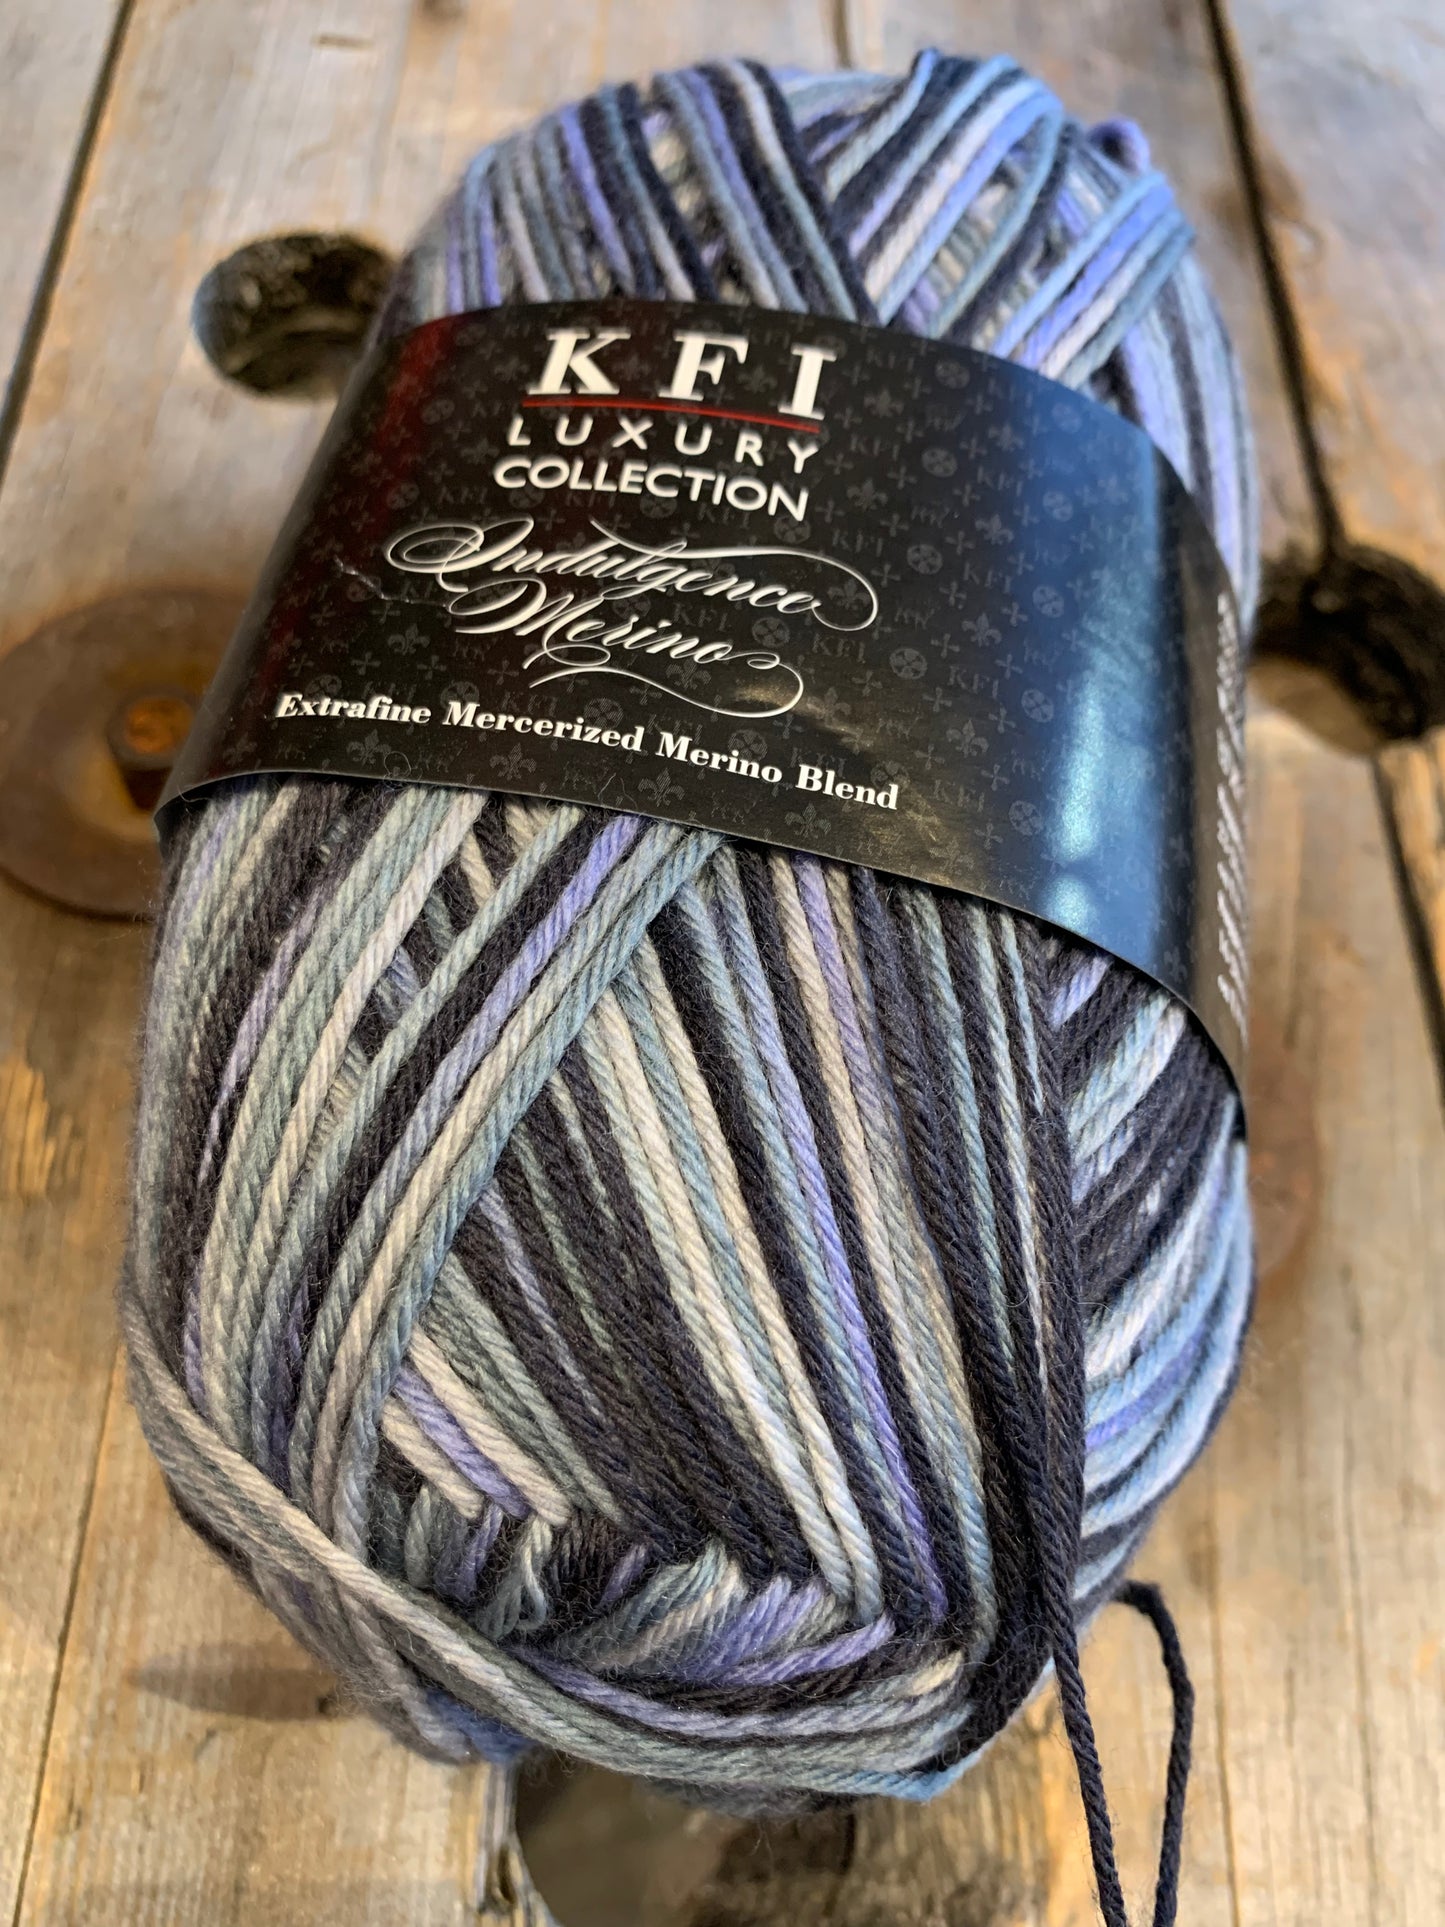 KFI - Luxury Collection - Indulgence Merino - DK pour chaussettes